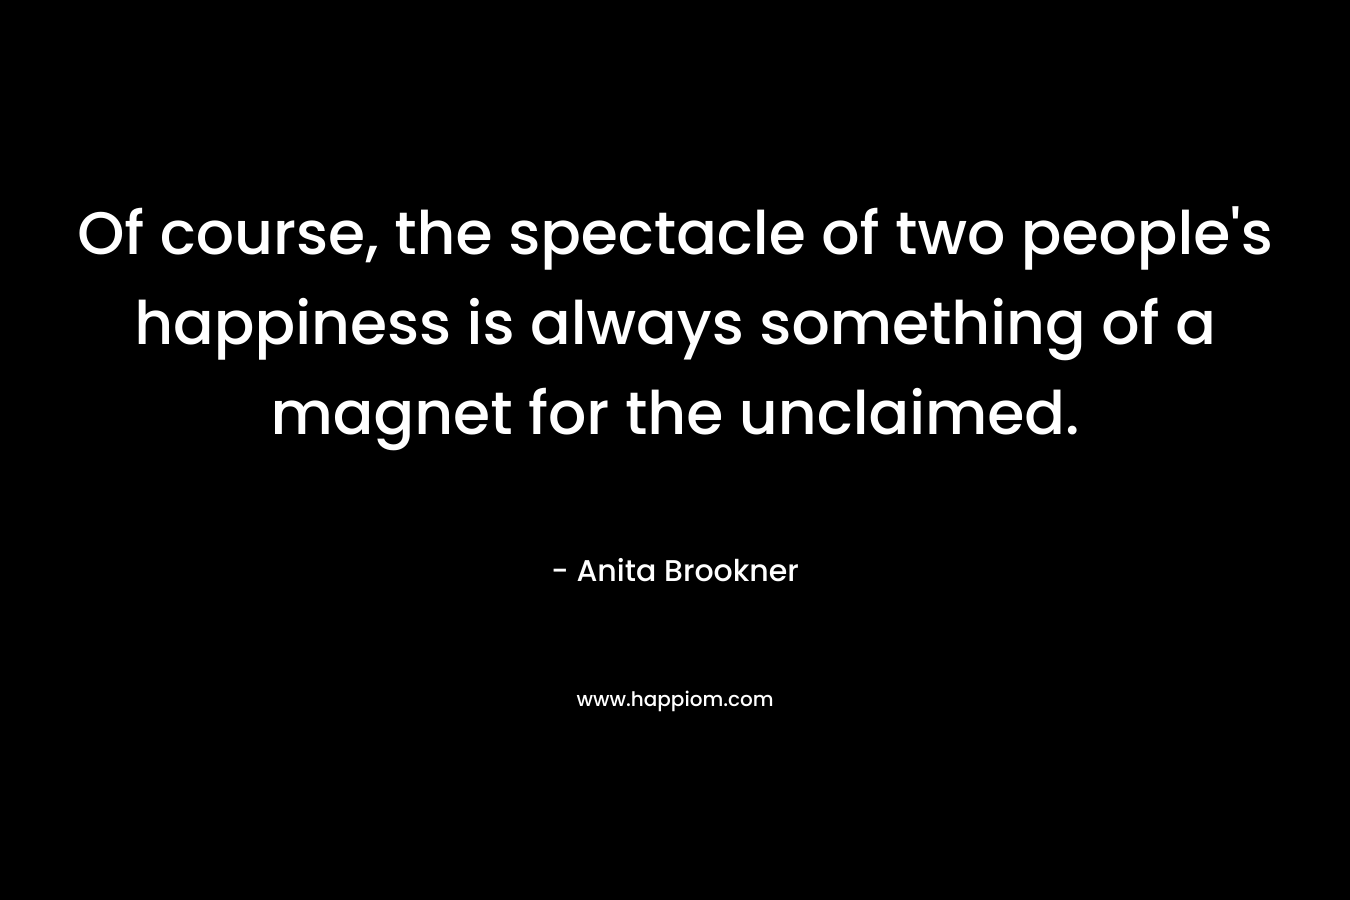 Of course, the spectacle of two people's happiness is always something of a magnet for the unclaimed.